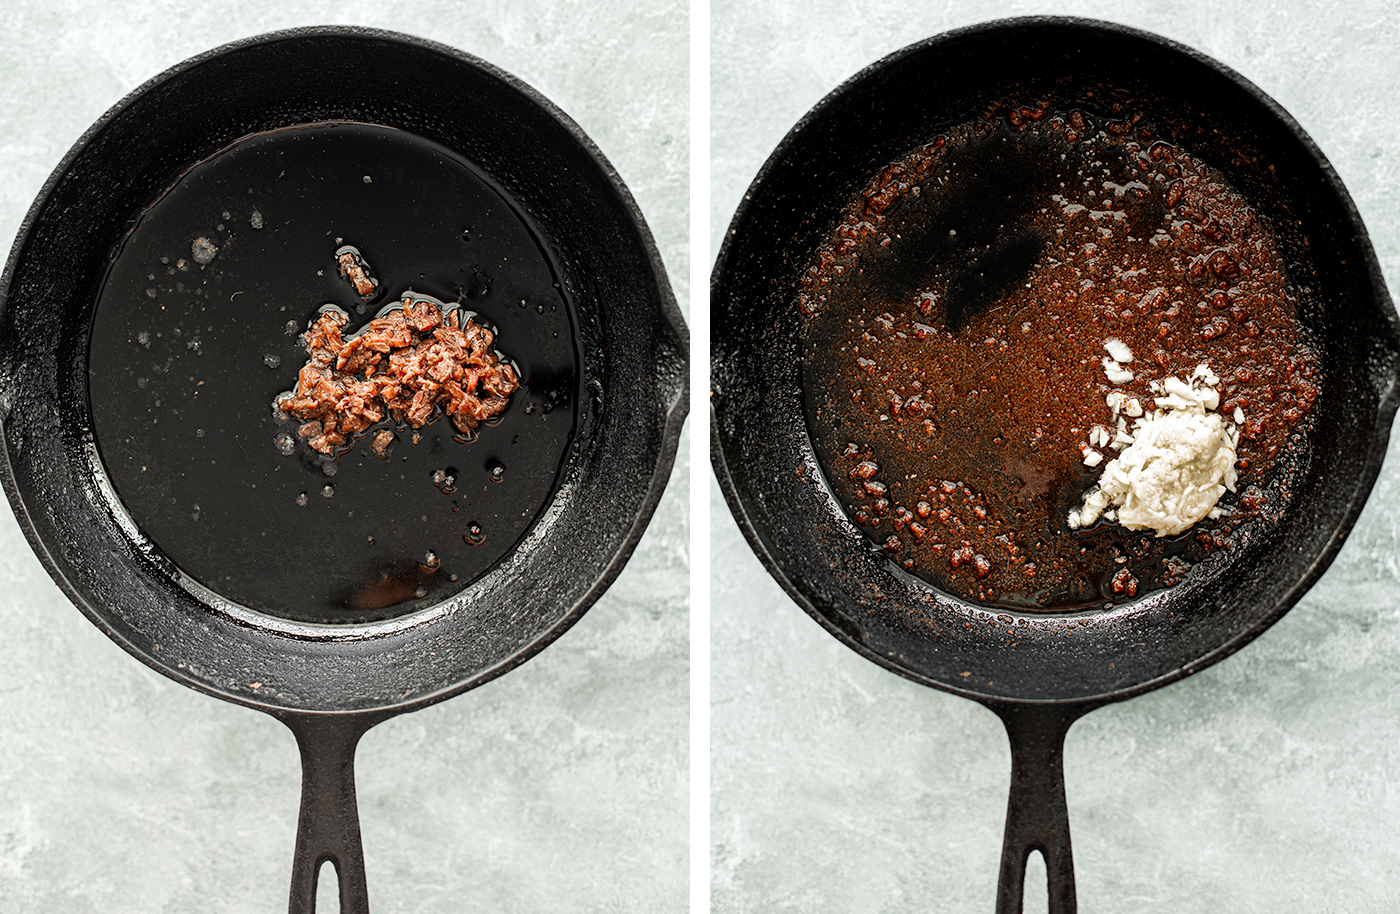 Cast iron skillet process shots: with chopped anchovies, then with melted anchovies and garlic.